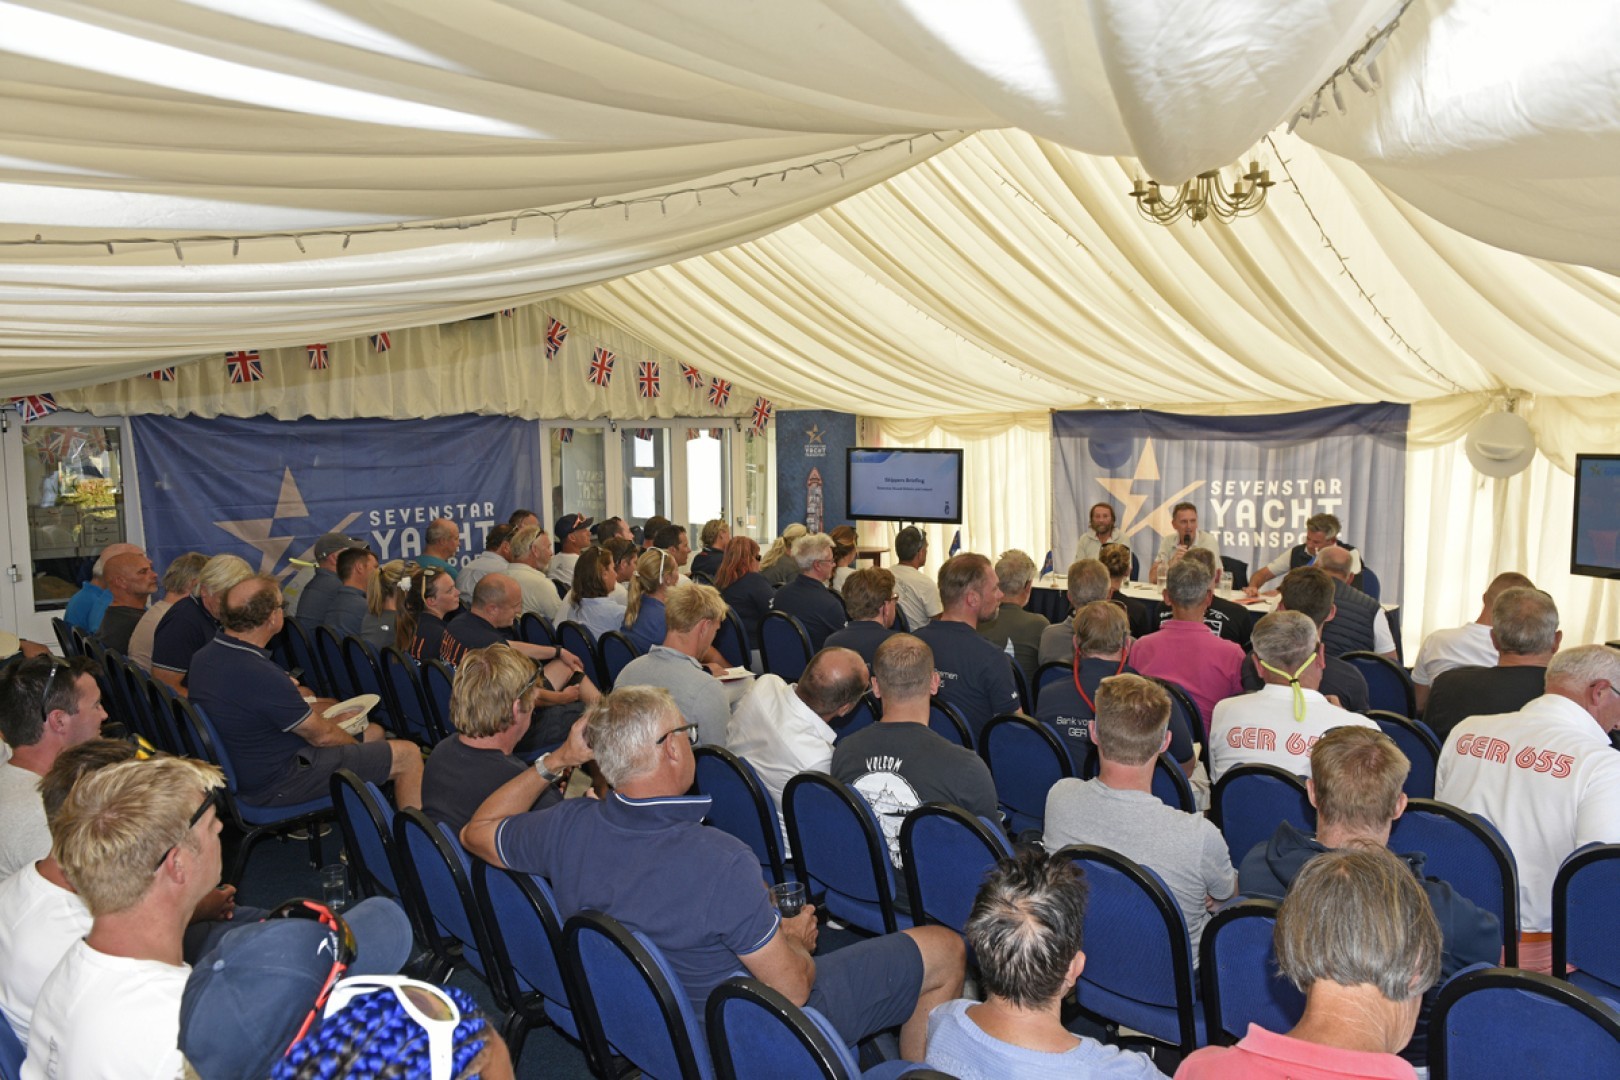 Skippers Briefing for the Sevenstar Round Britain and Ireland Race ahead of Sunday's start © Rick Tomlinson